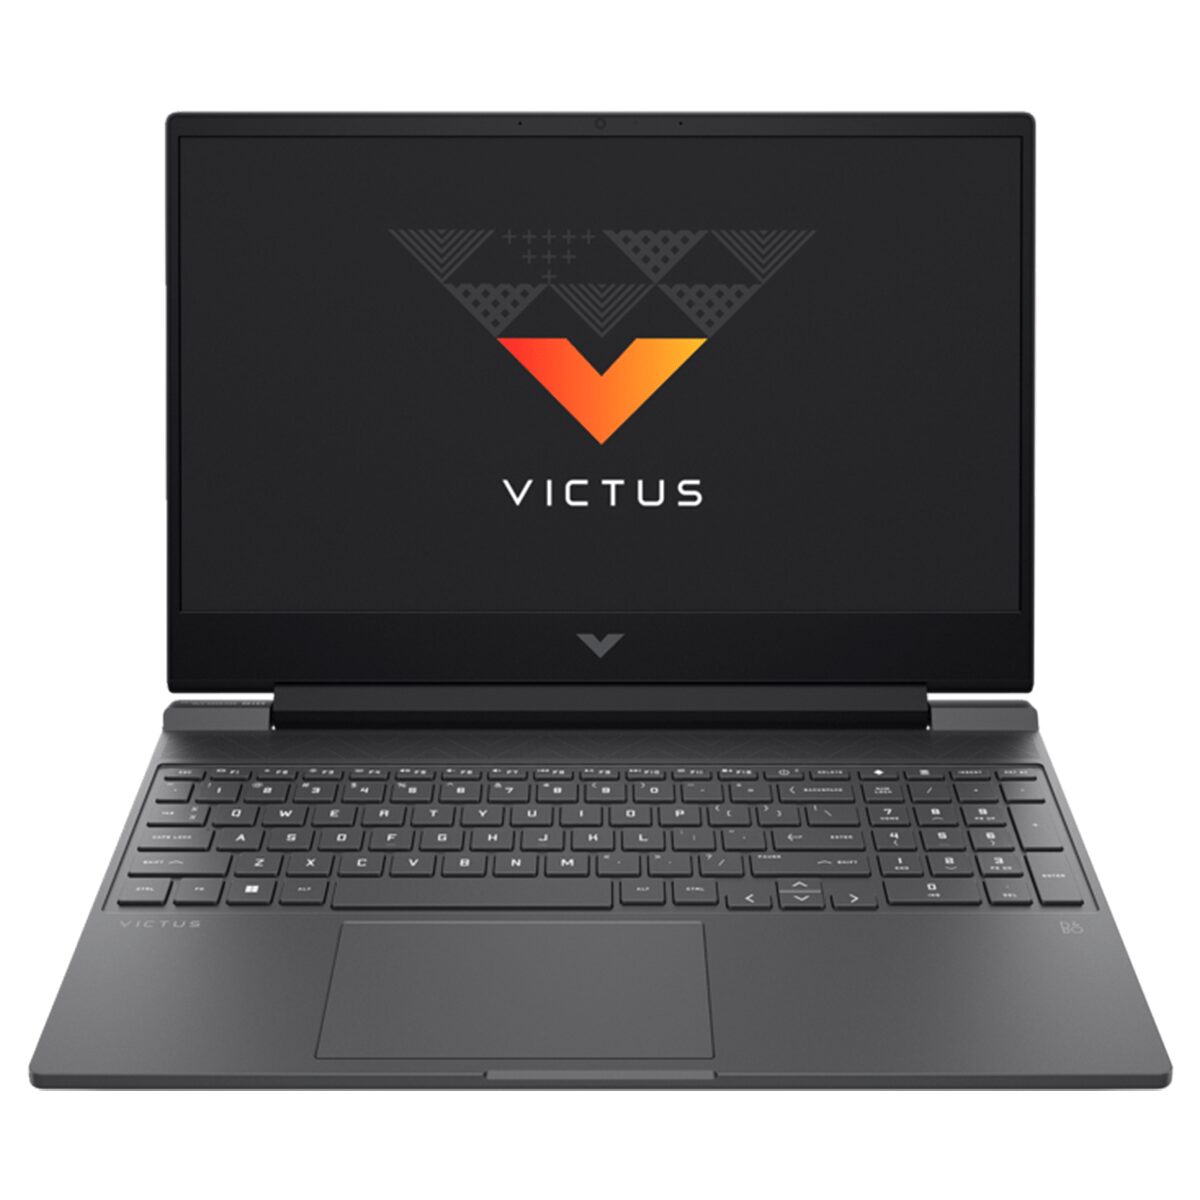 Victus Gaming Laptop 15-fa1021nia: A Comprehensive Review